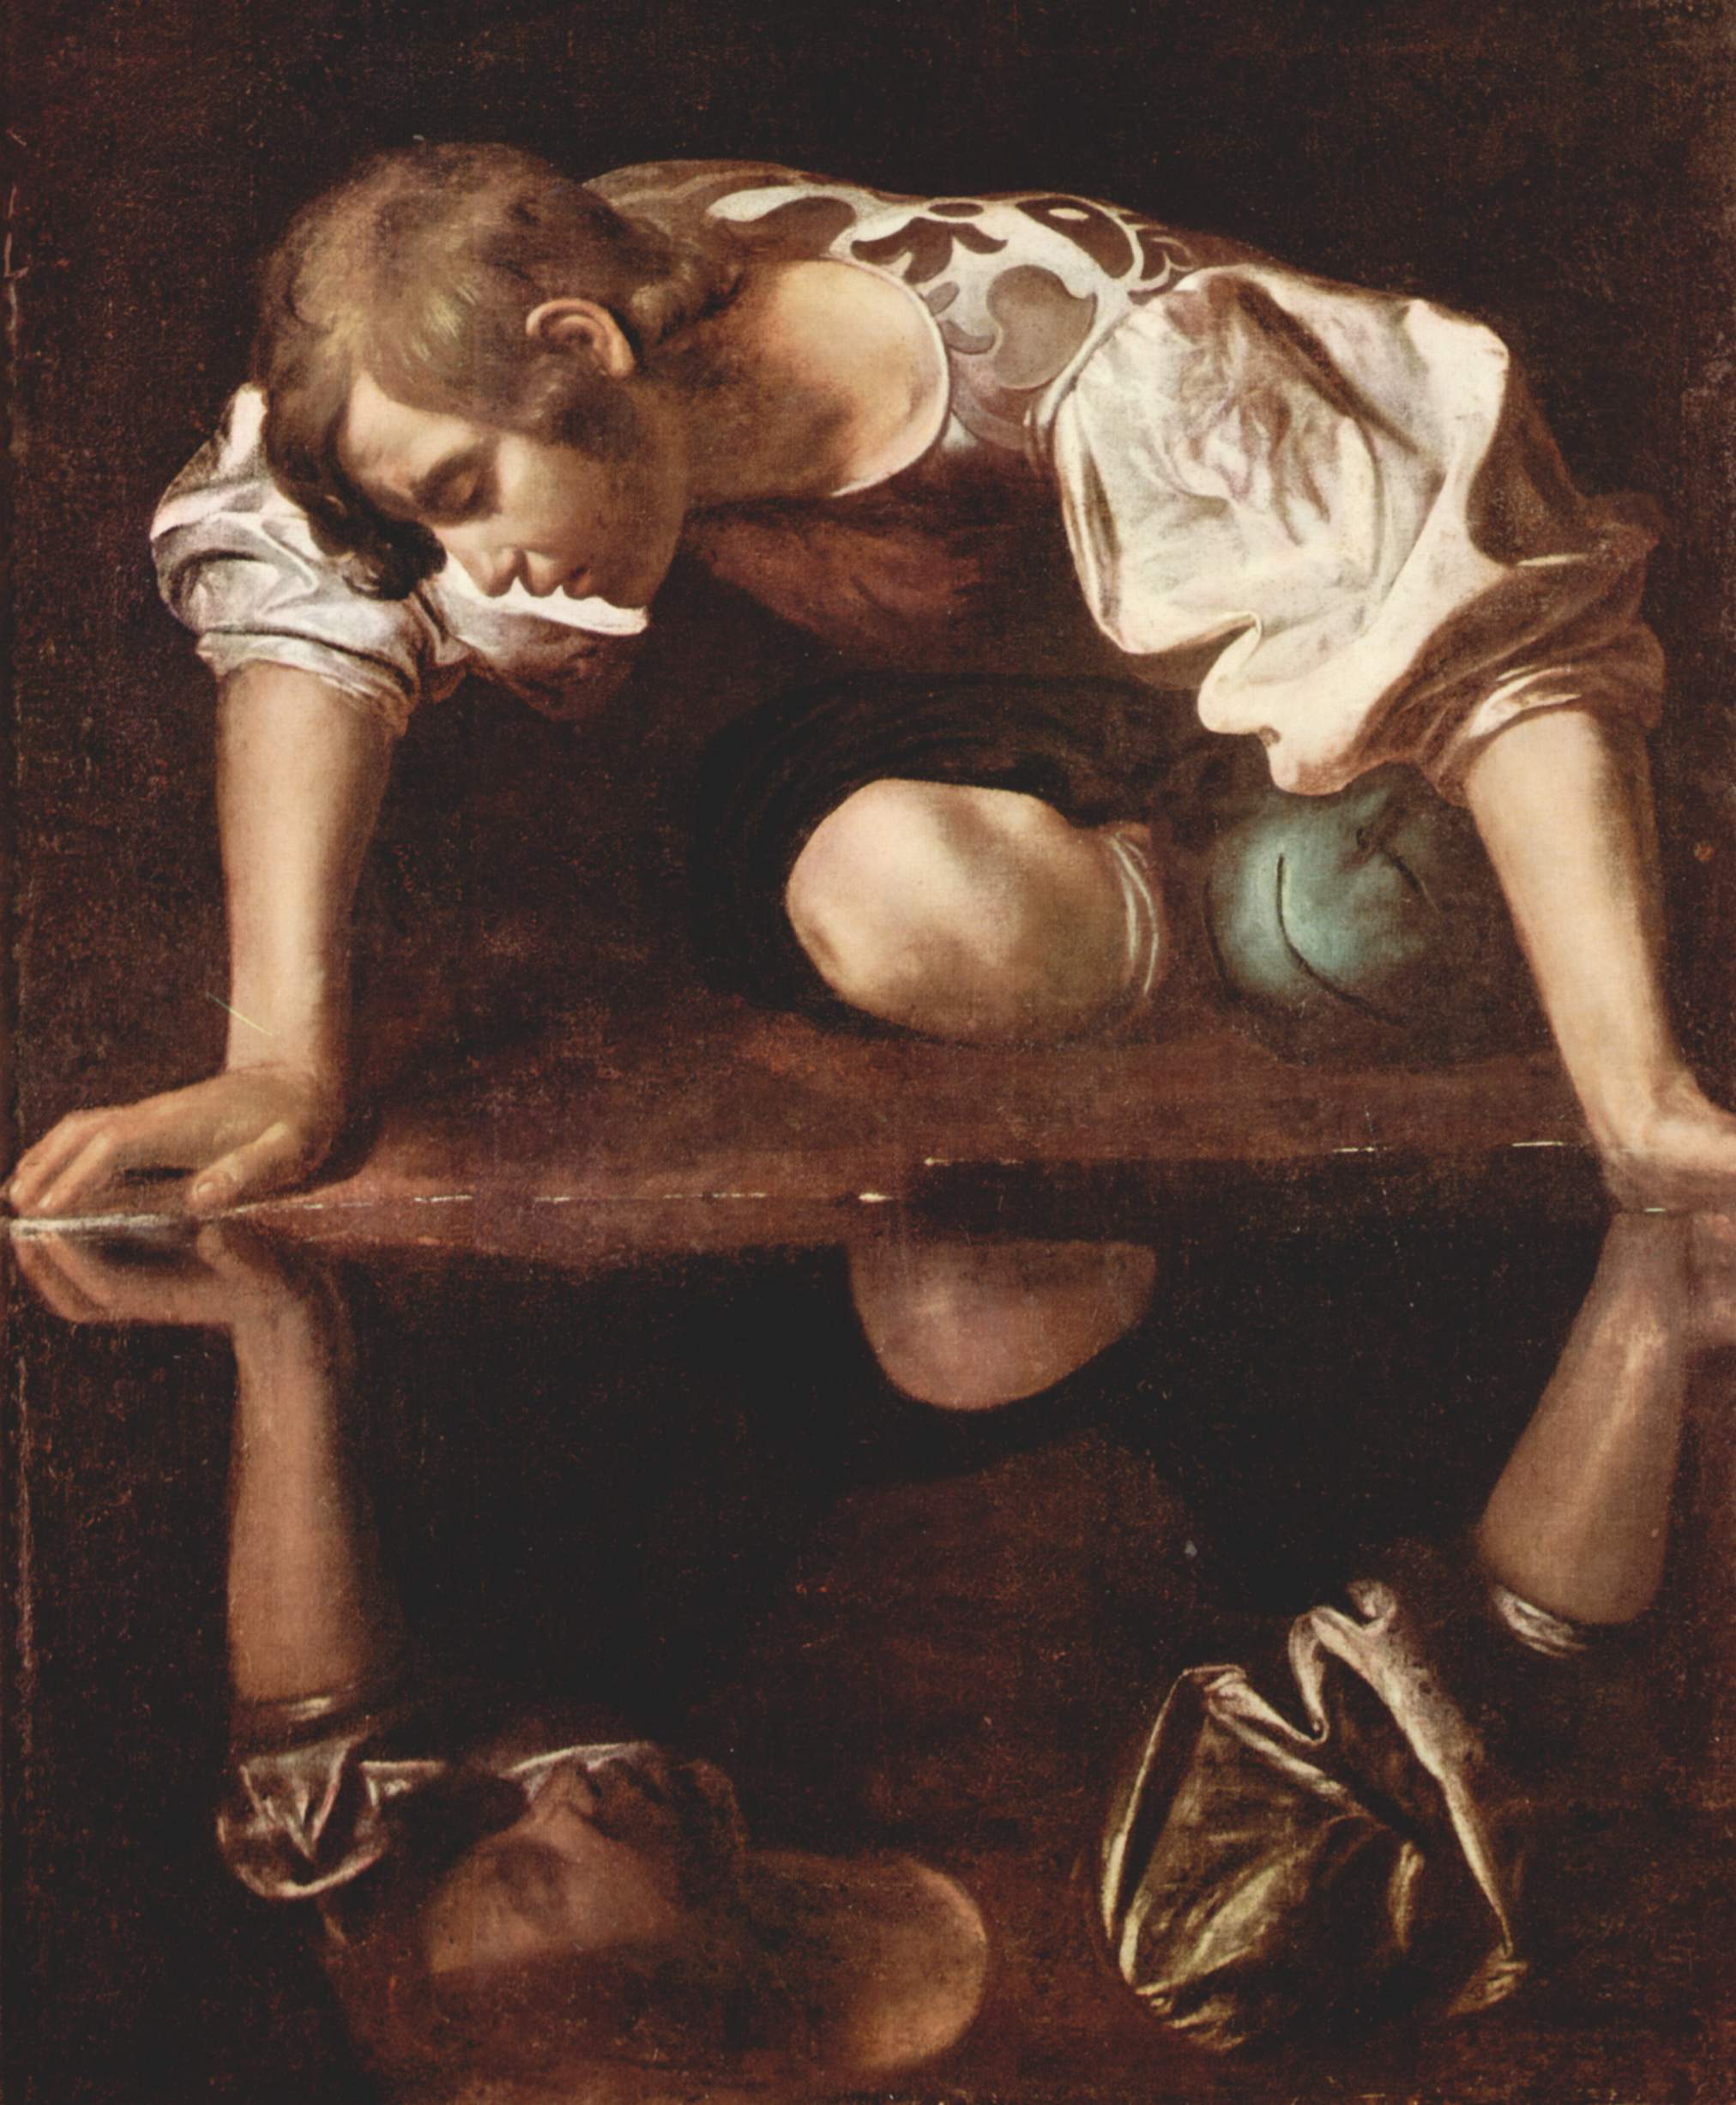 A painting of Narcissus looking at his reflection in the water.